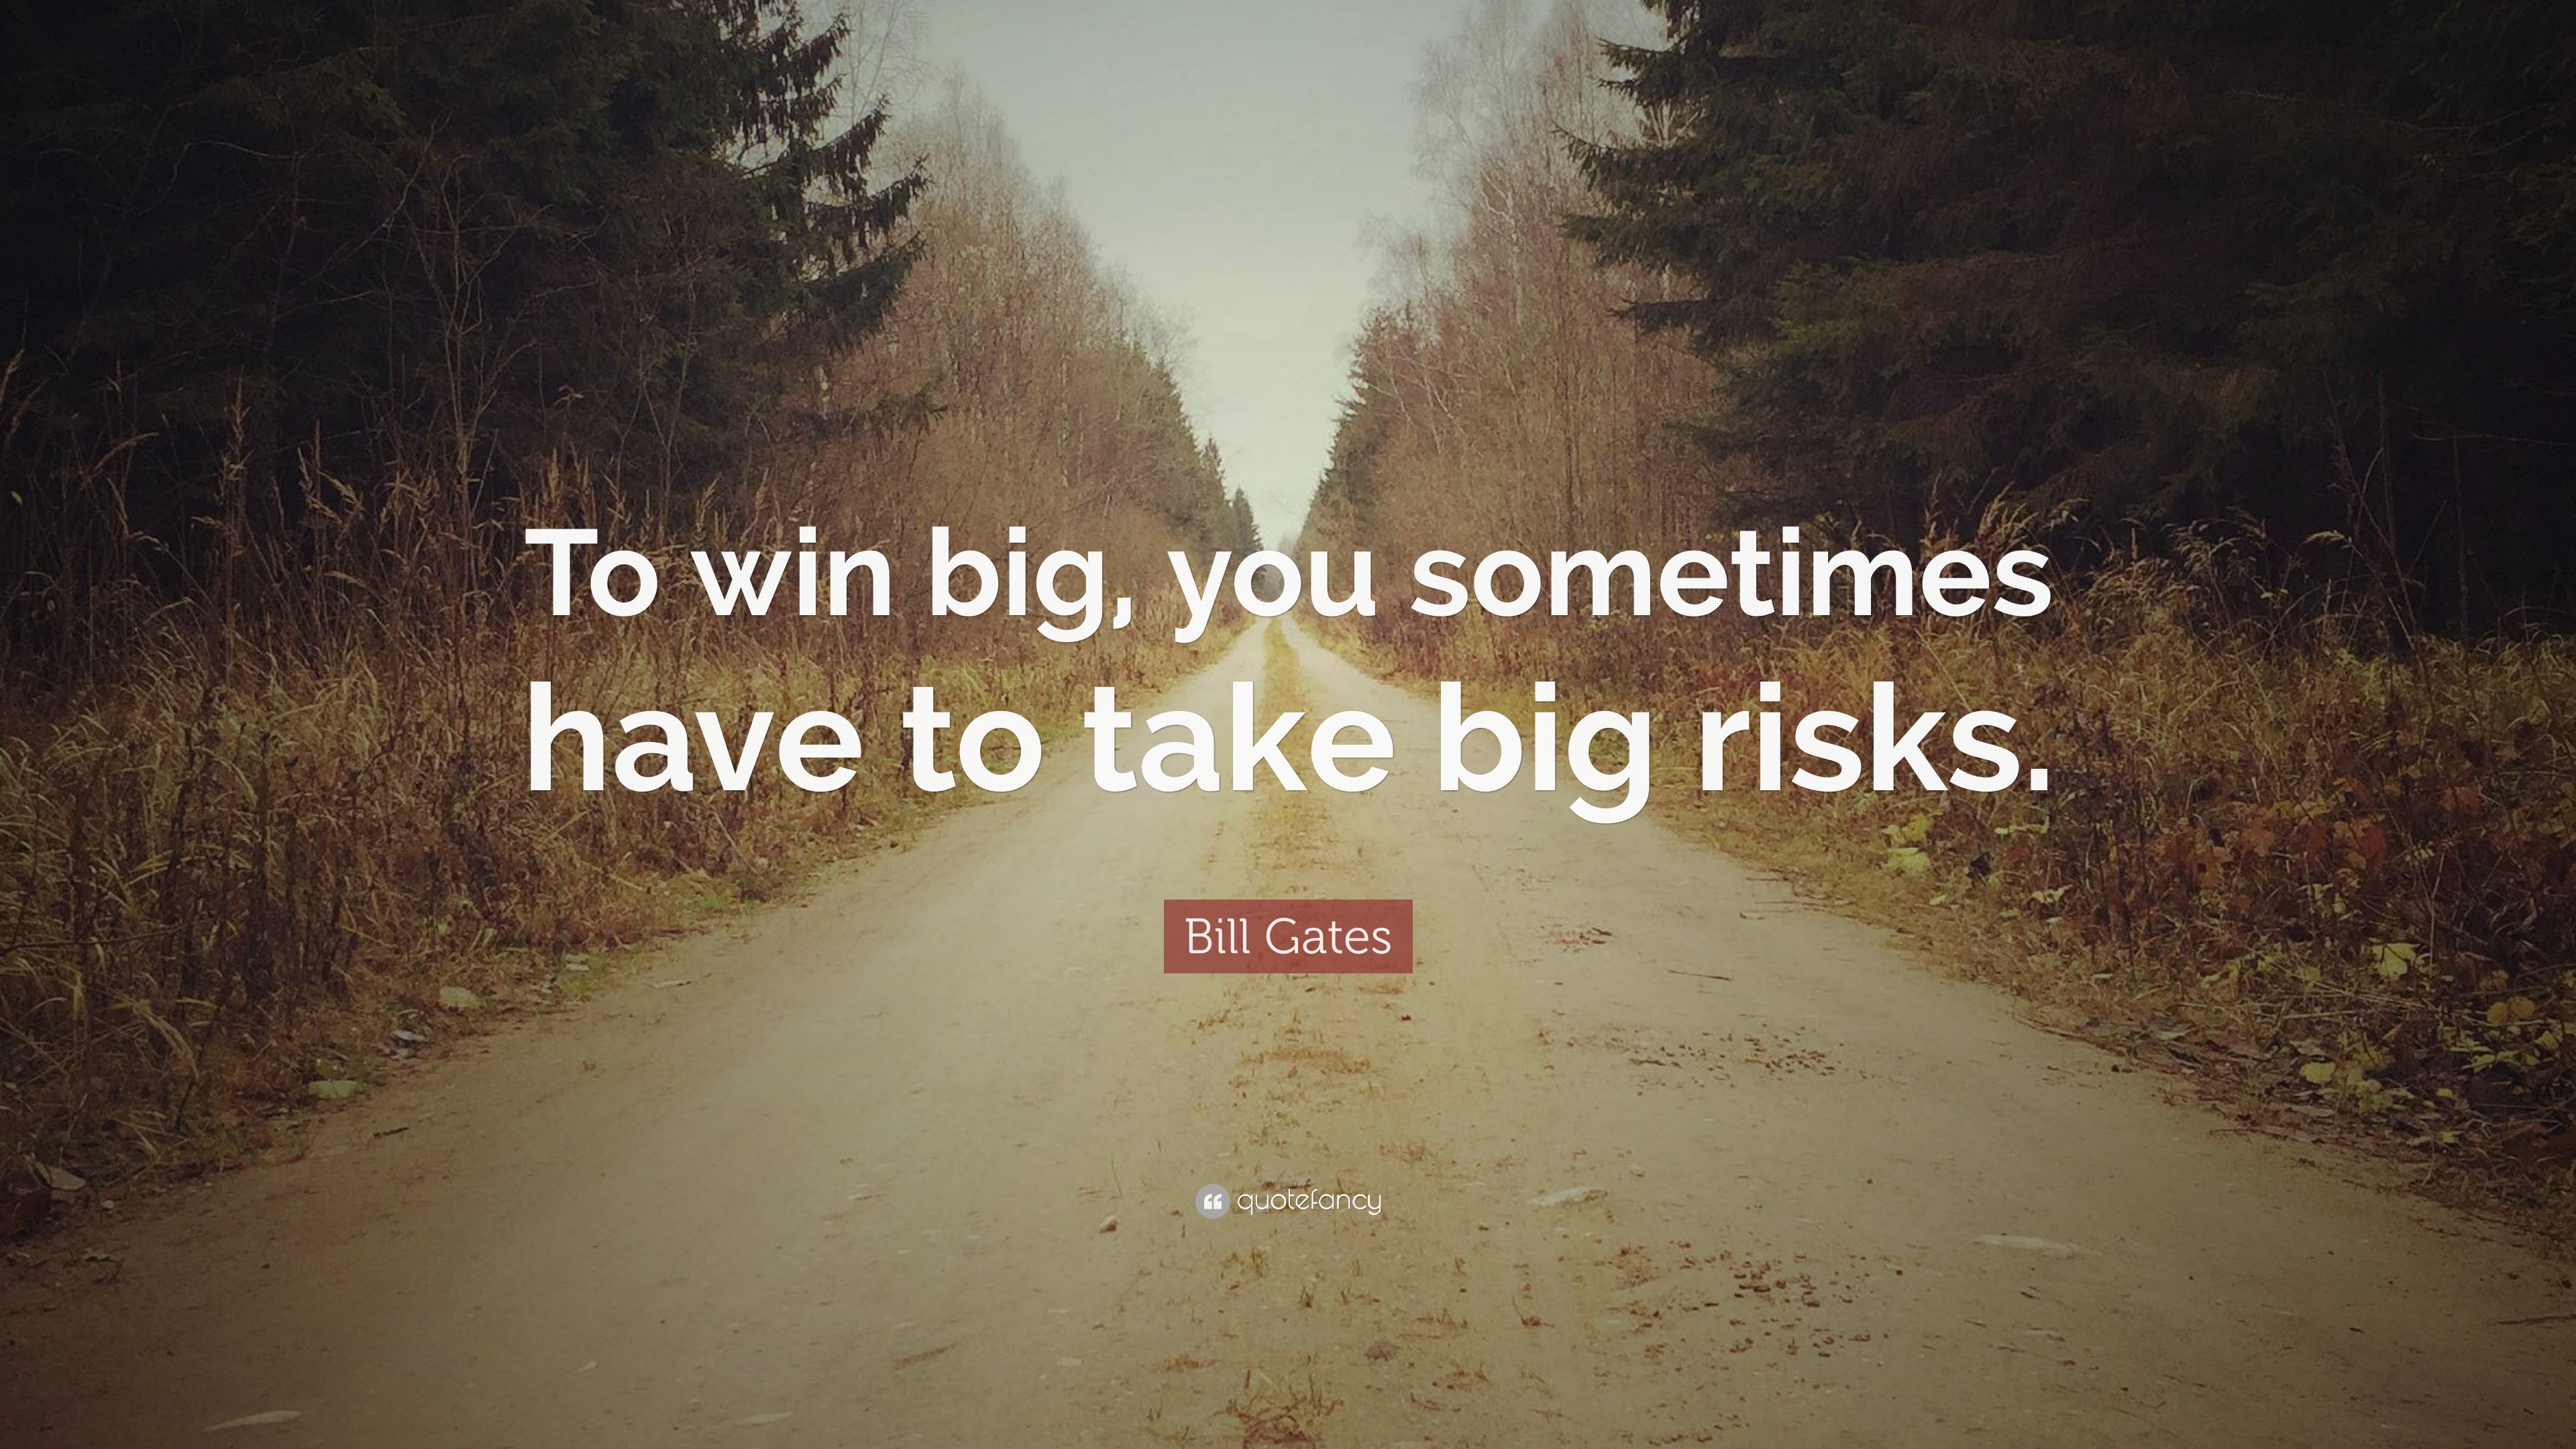 Bill Gates Quote: “To win big, you sometimes have to take big risks